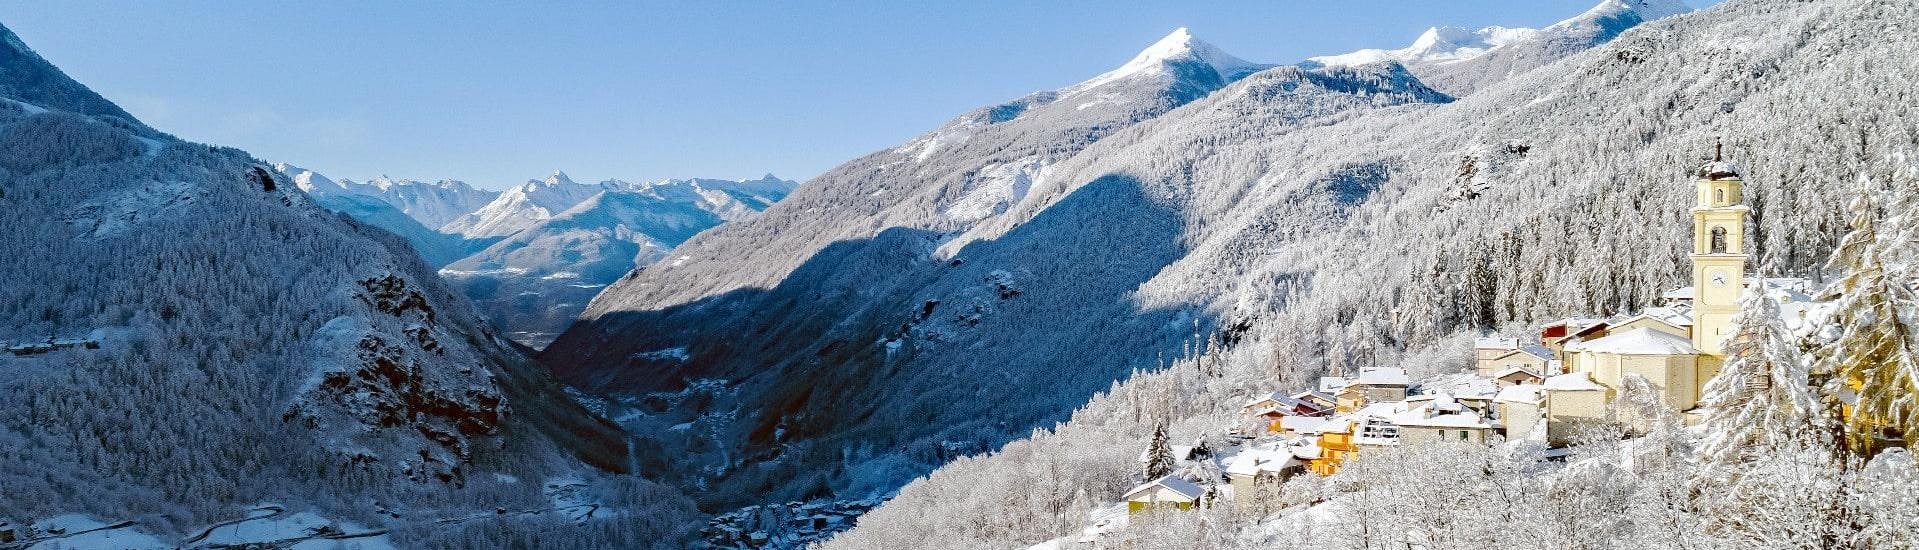 An image of the village of Primolo in the dreamy valley of Valmalenco, a popular place among prospective skiers who want to book ski lessons with one of the local ski schools.